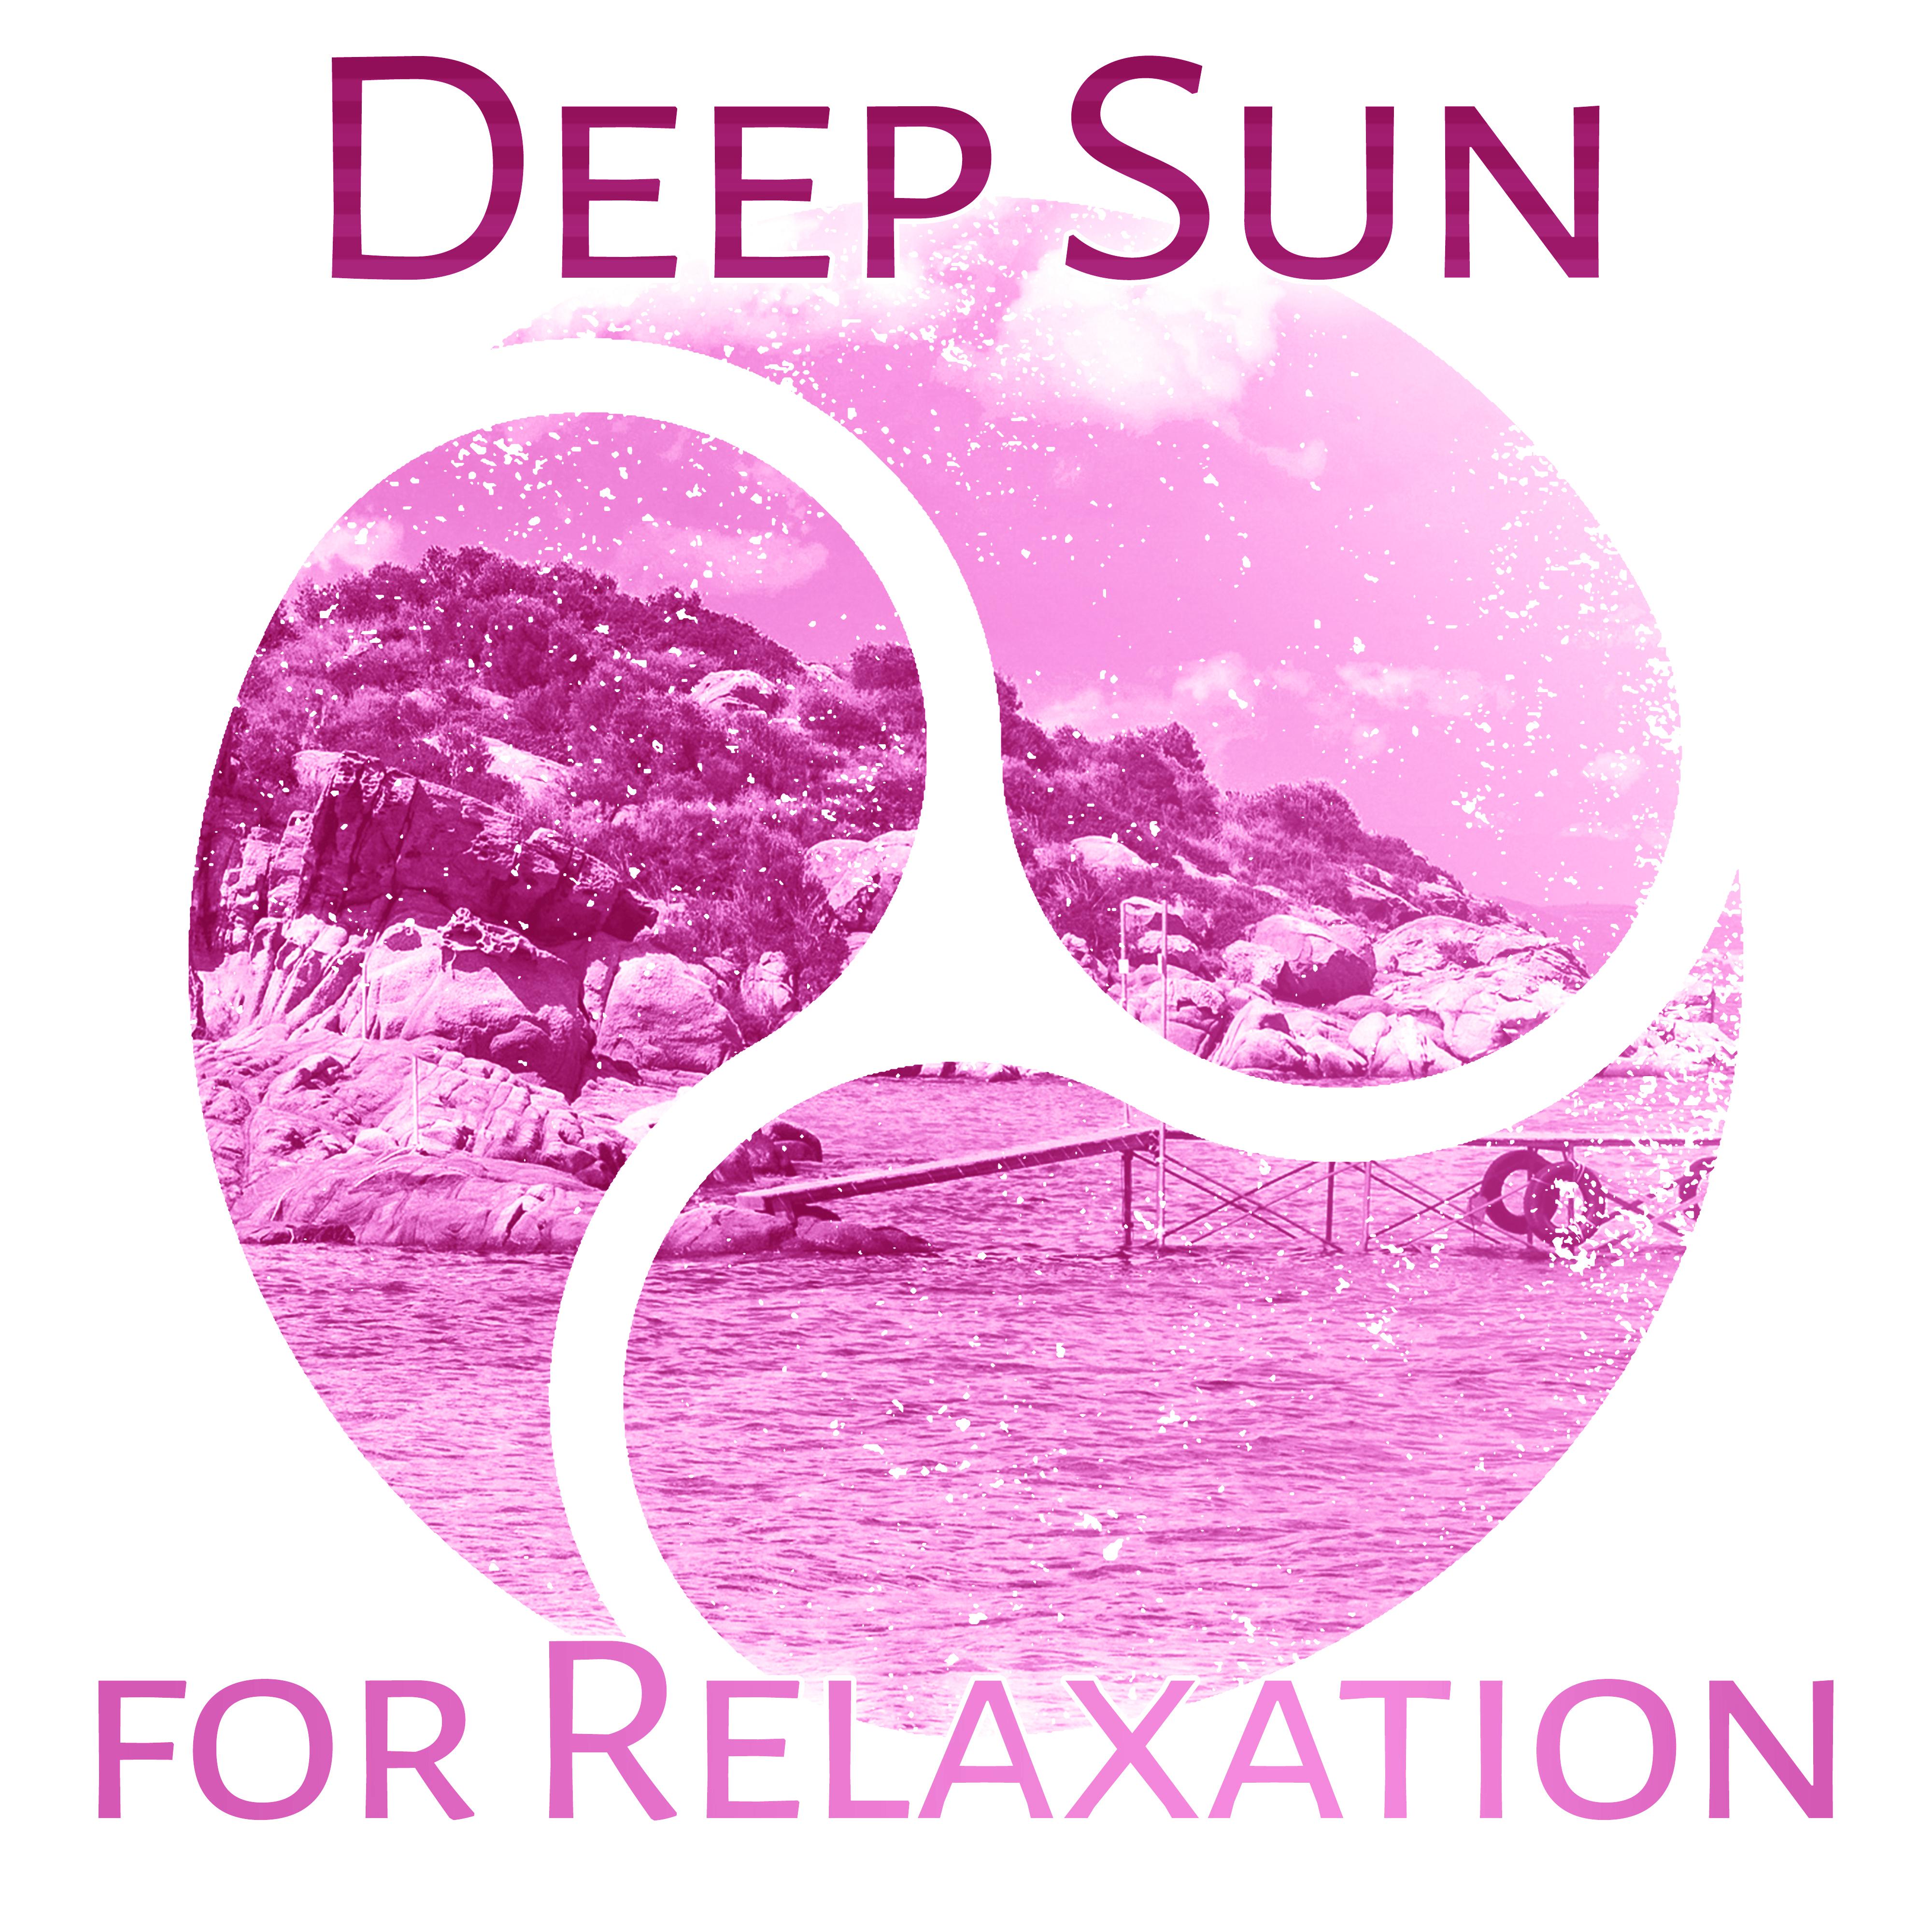 Deep Sun for Relaxation  Chillout Music, Summertime, Beach Party, Total Rest, Relaxation Songs